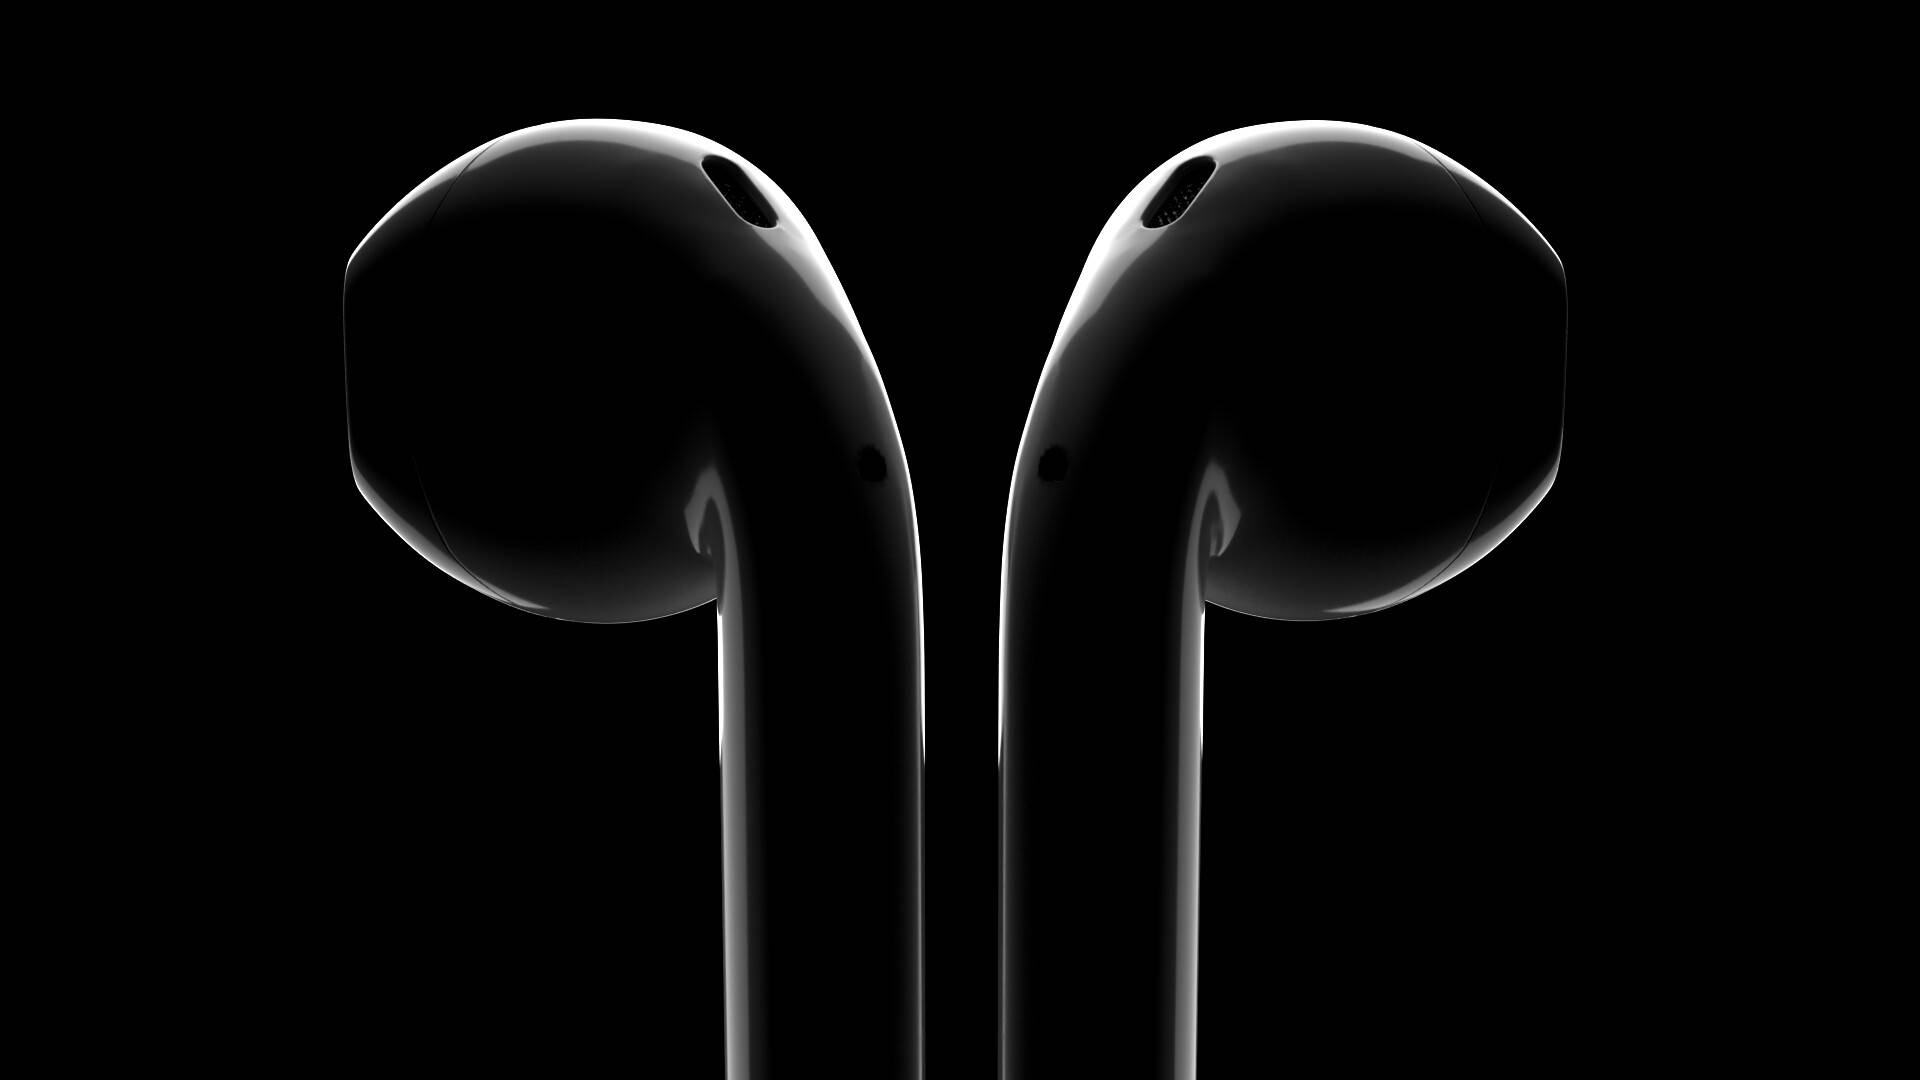 Airpods Jet Black Earbuds Background